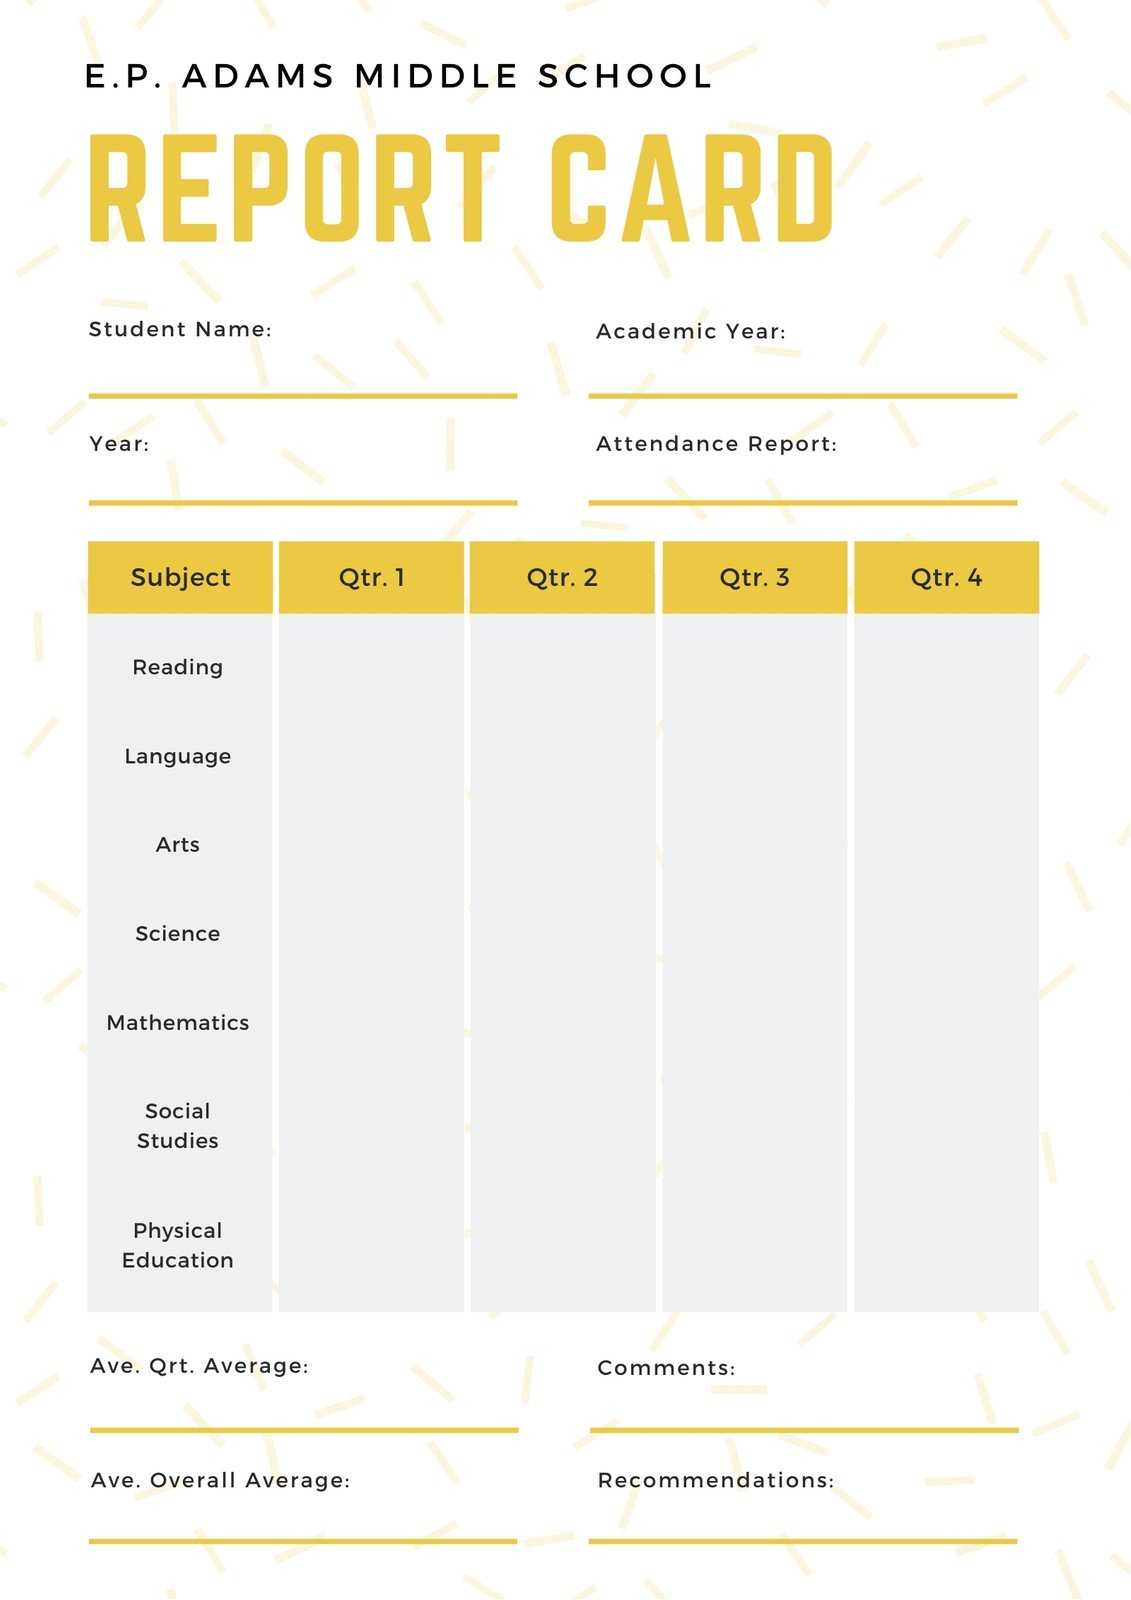 White And Yellow Simple Sprinkled Middle School Report Card Within Boyfriend Report Card Template